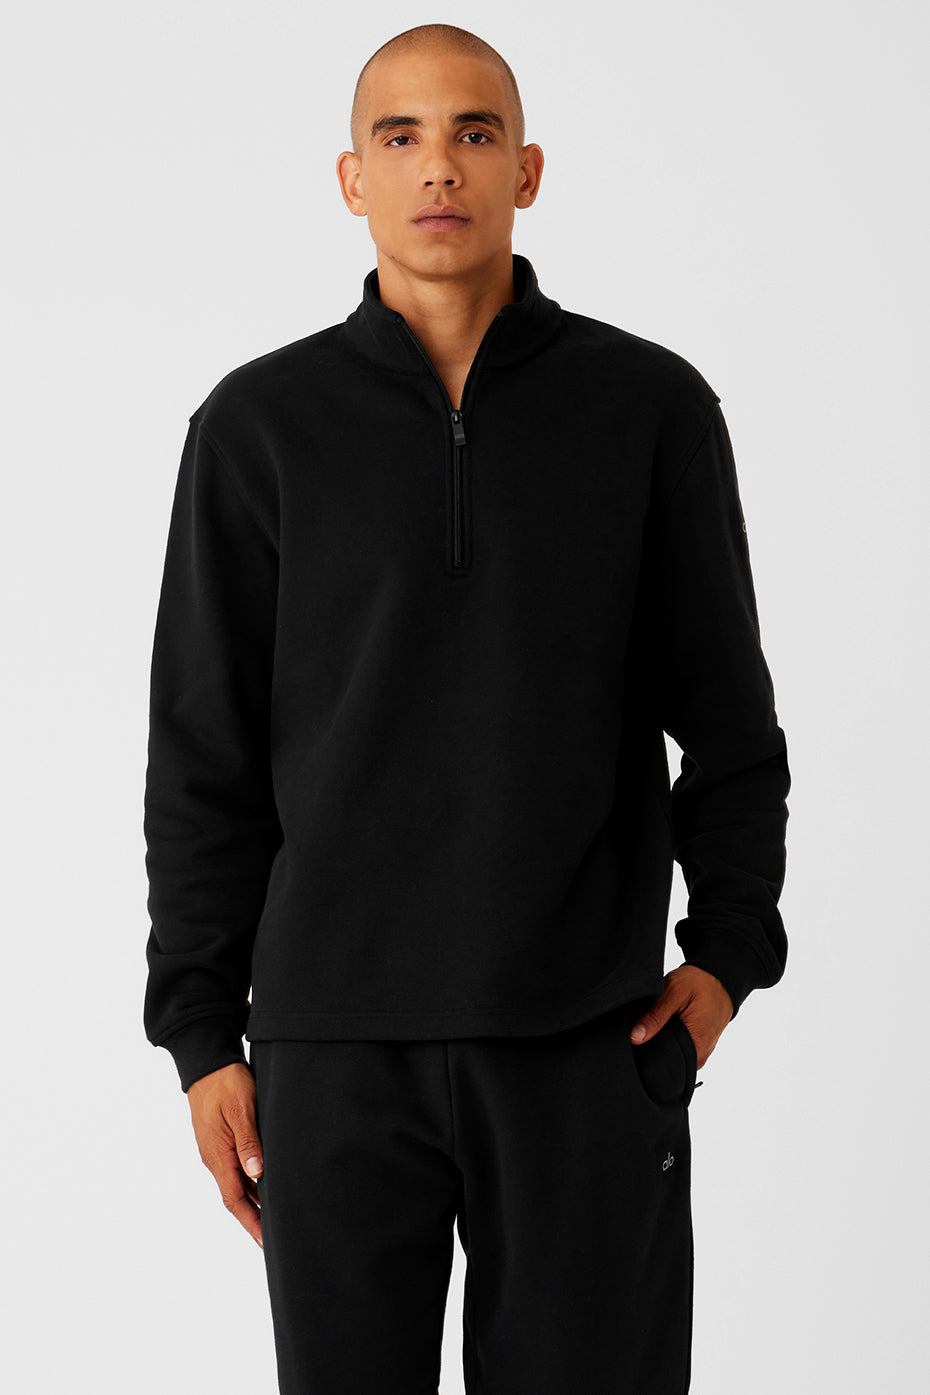 Alo Accolade Hoodie Review